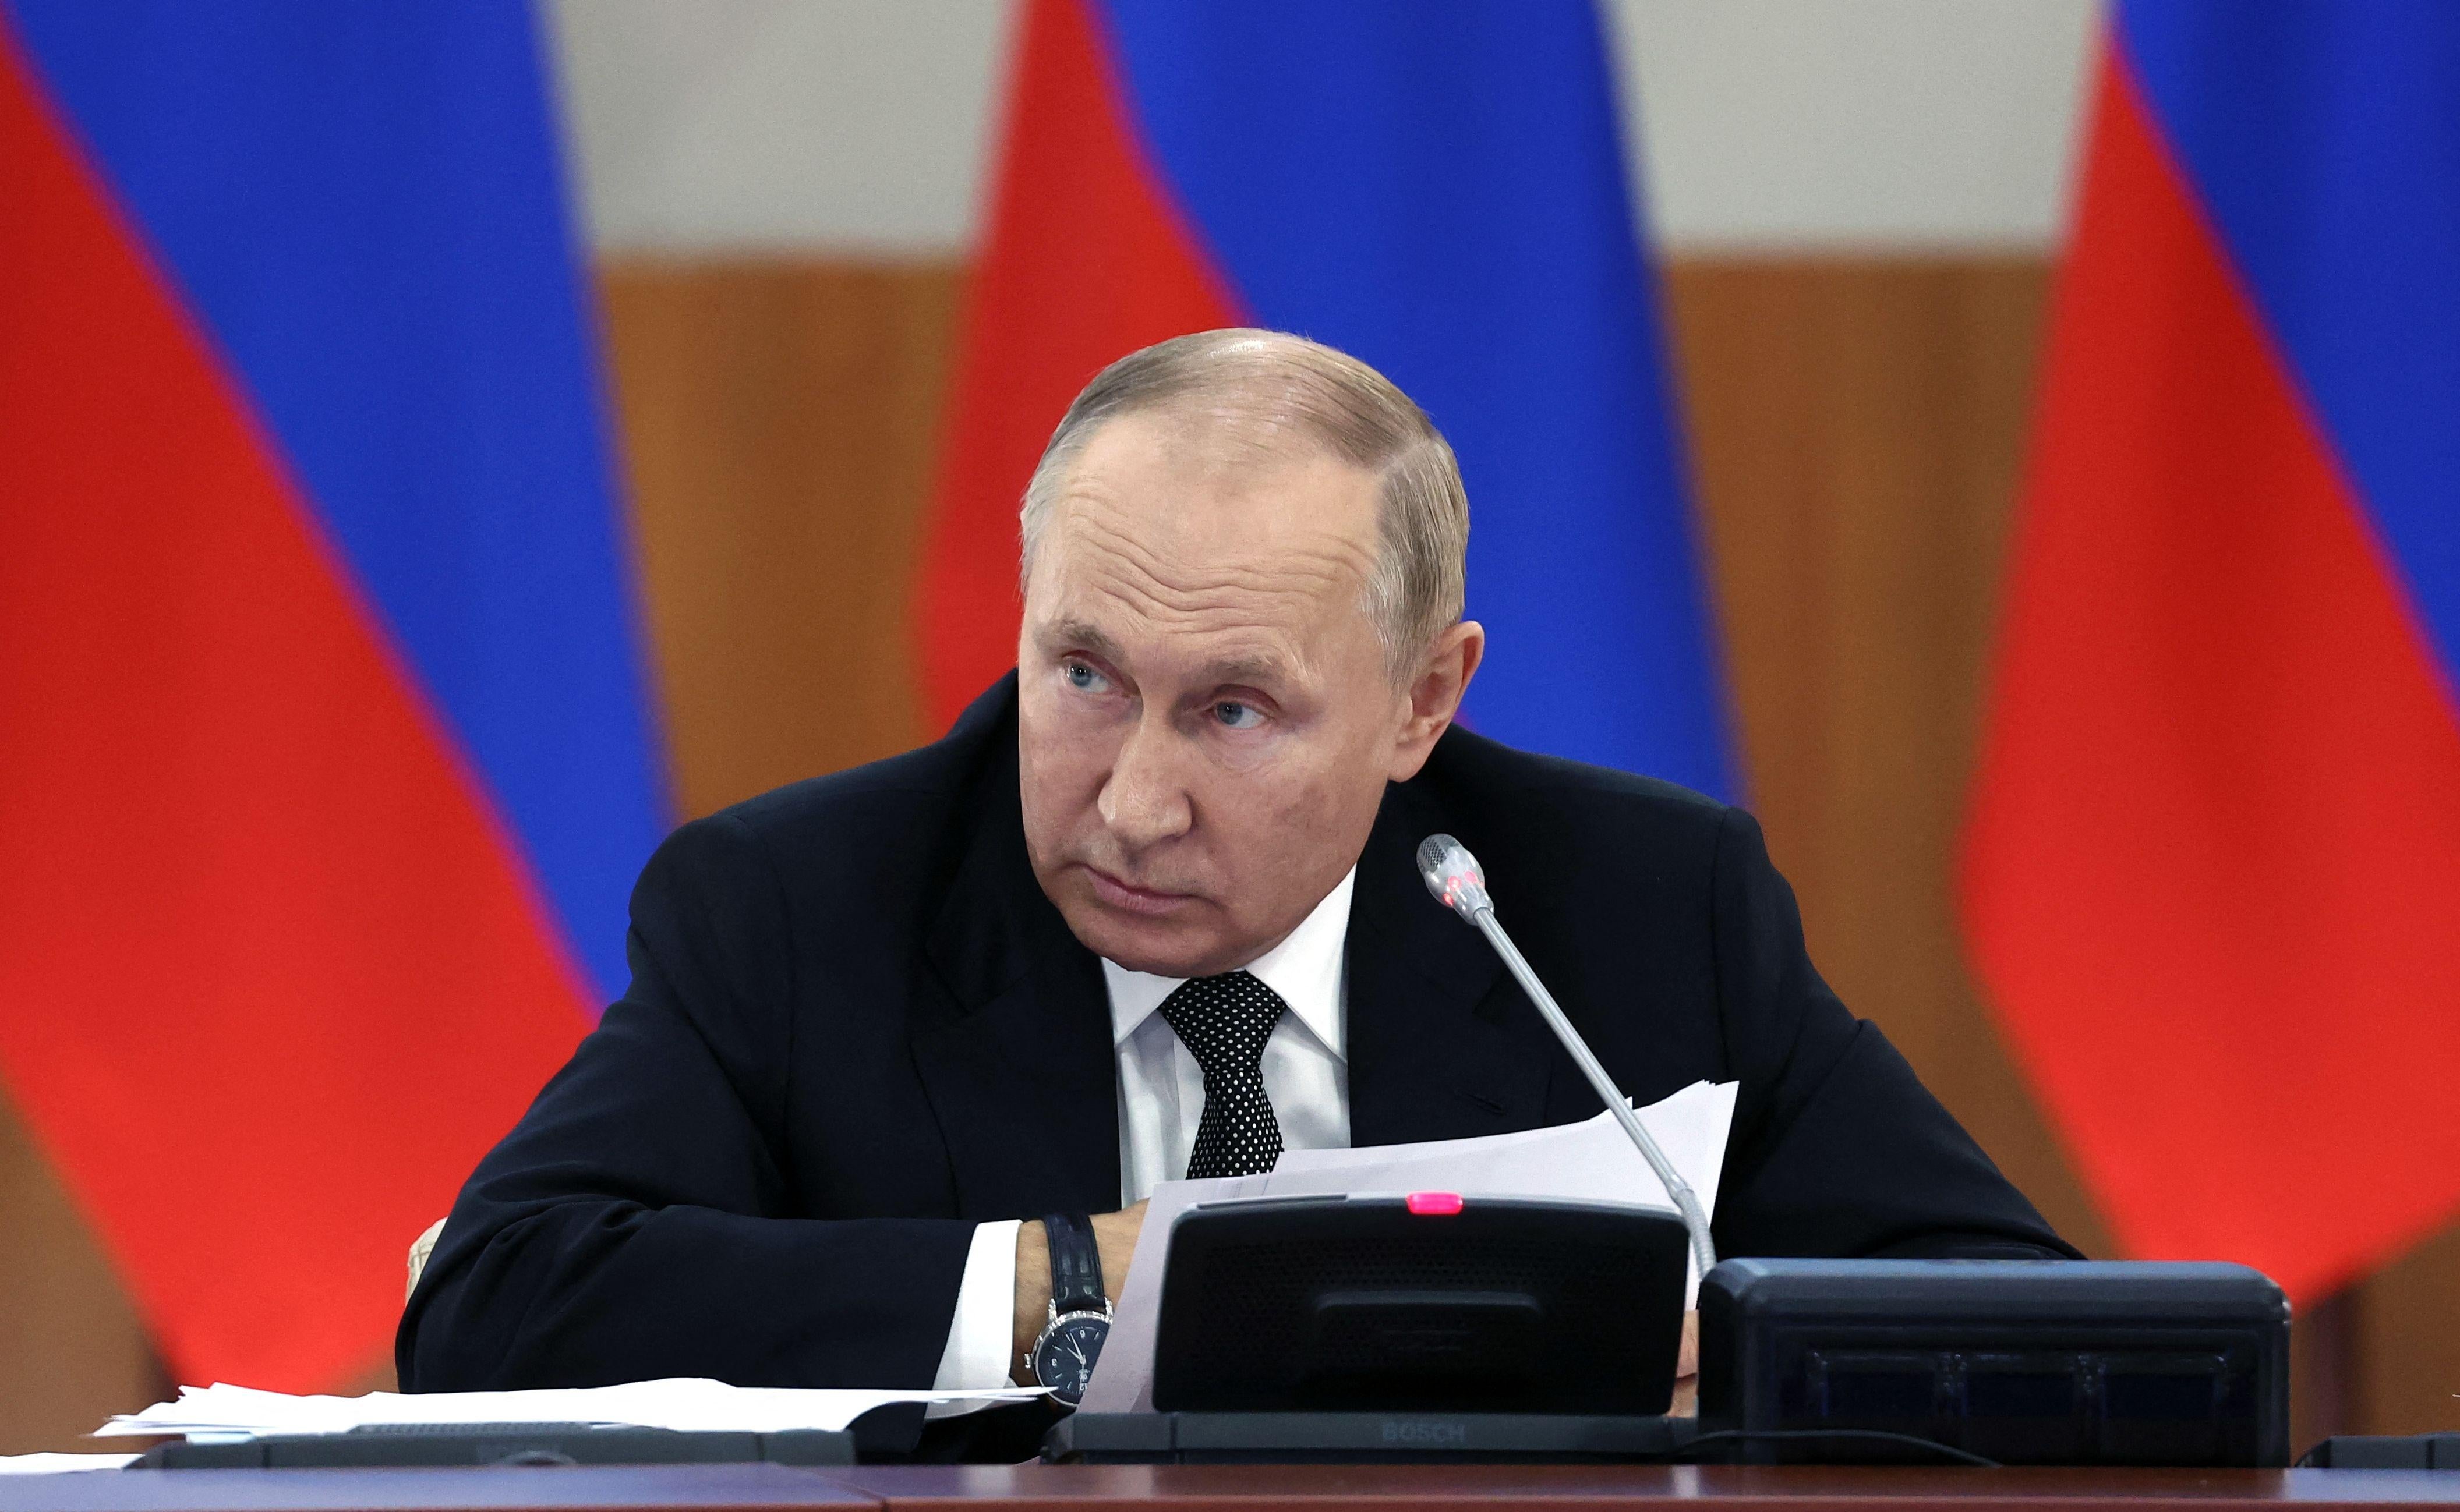 Russian President Vladimir Putin chairs a meeting of the State Council Presidium on the development of the national tourism industry at the Far Eastern Federal University in Vladivostok on September 6, 2022. He is hunched over with Russian flags behind him.